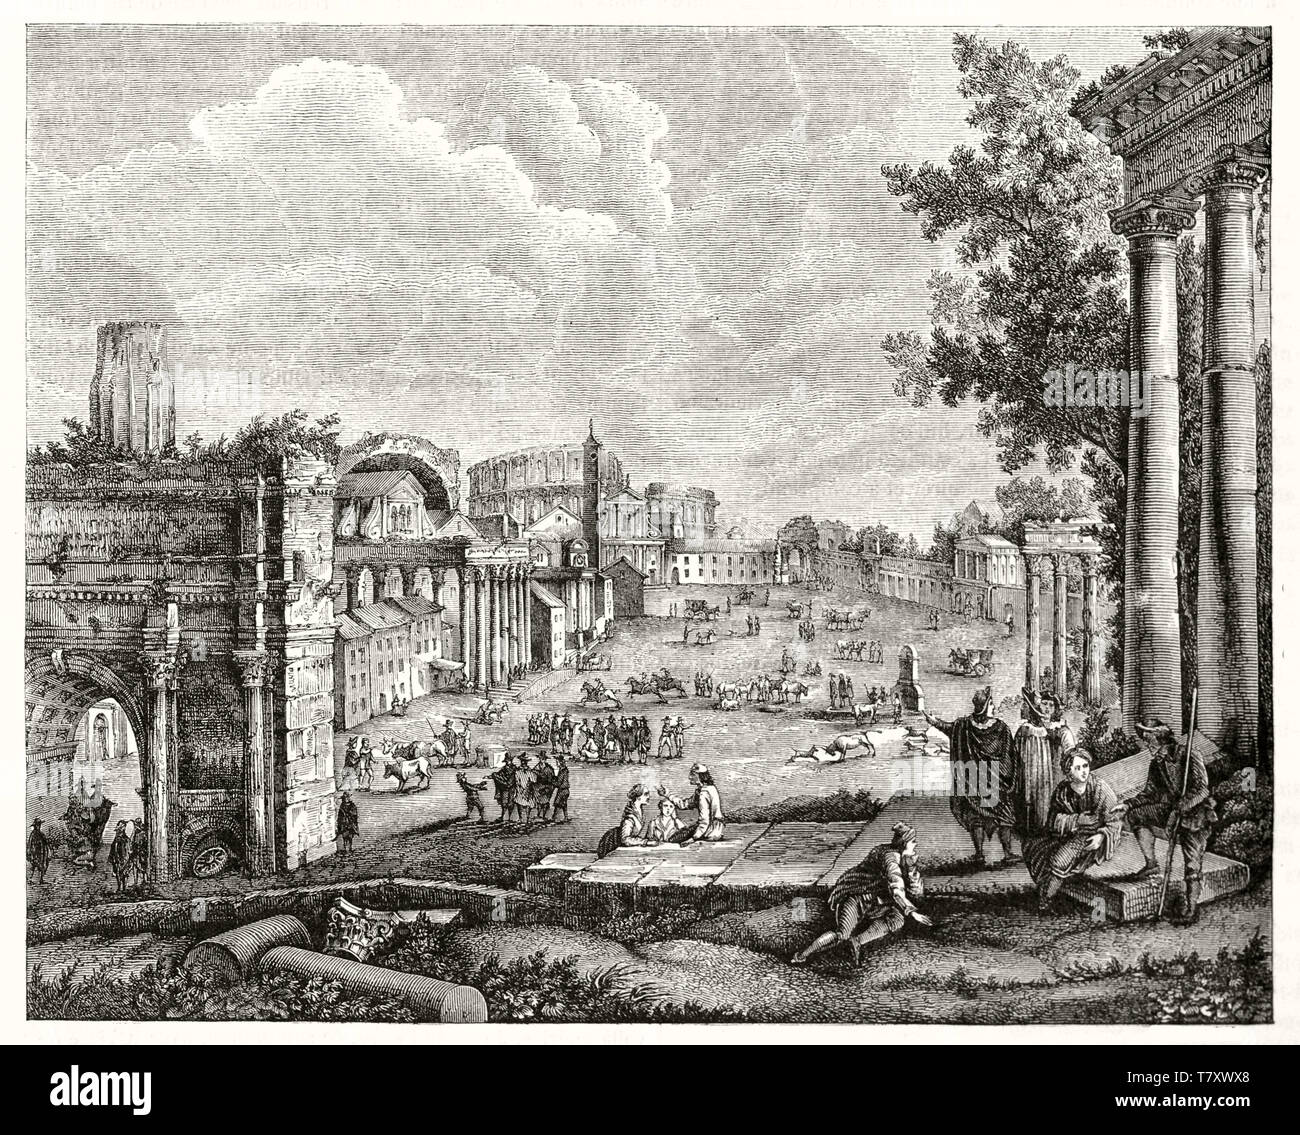 Panoramic view of the ruins of imperial roman forum in the middle ages, depicted in grayscale etching style. Campo Vaccino Imperial forum in Rome. Magasin Pittoresque Paris 1848 Stock Photo